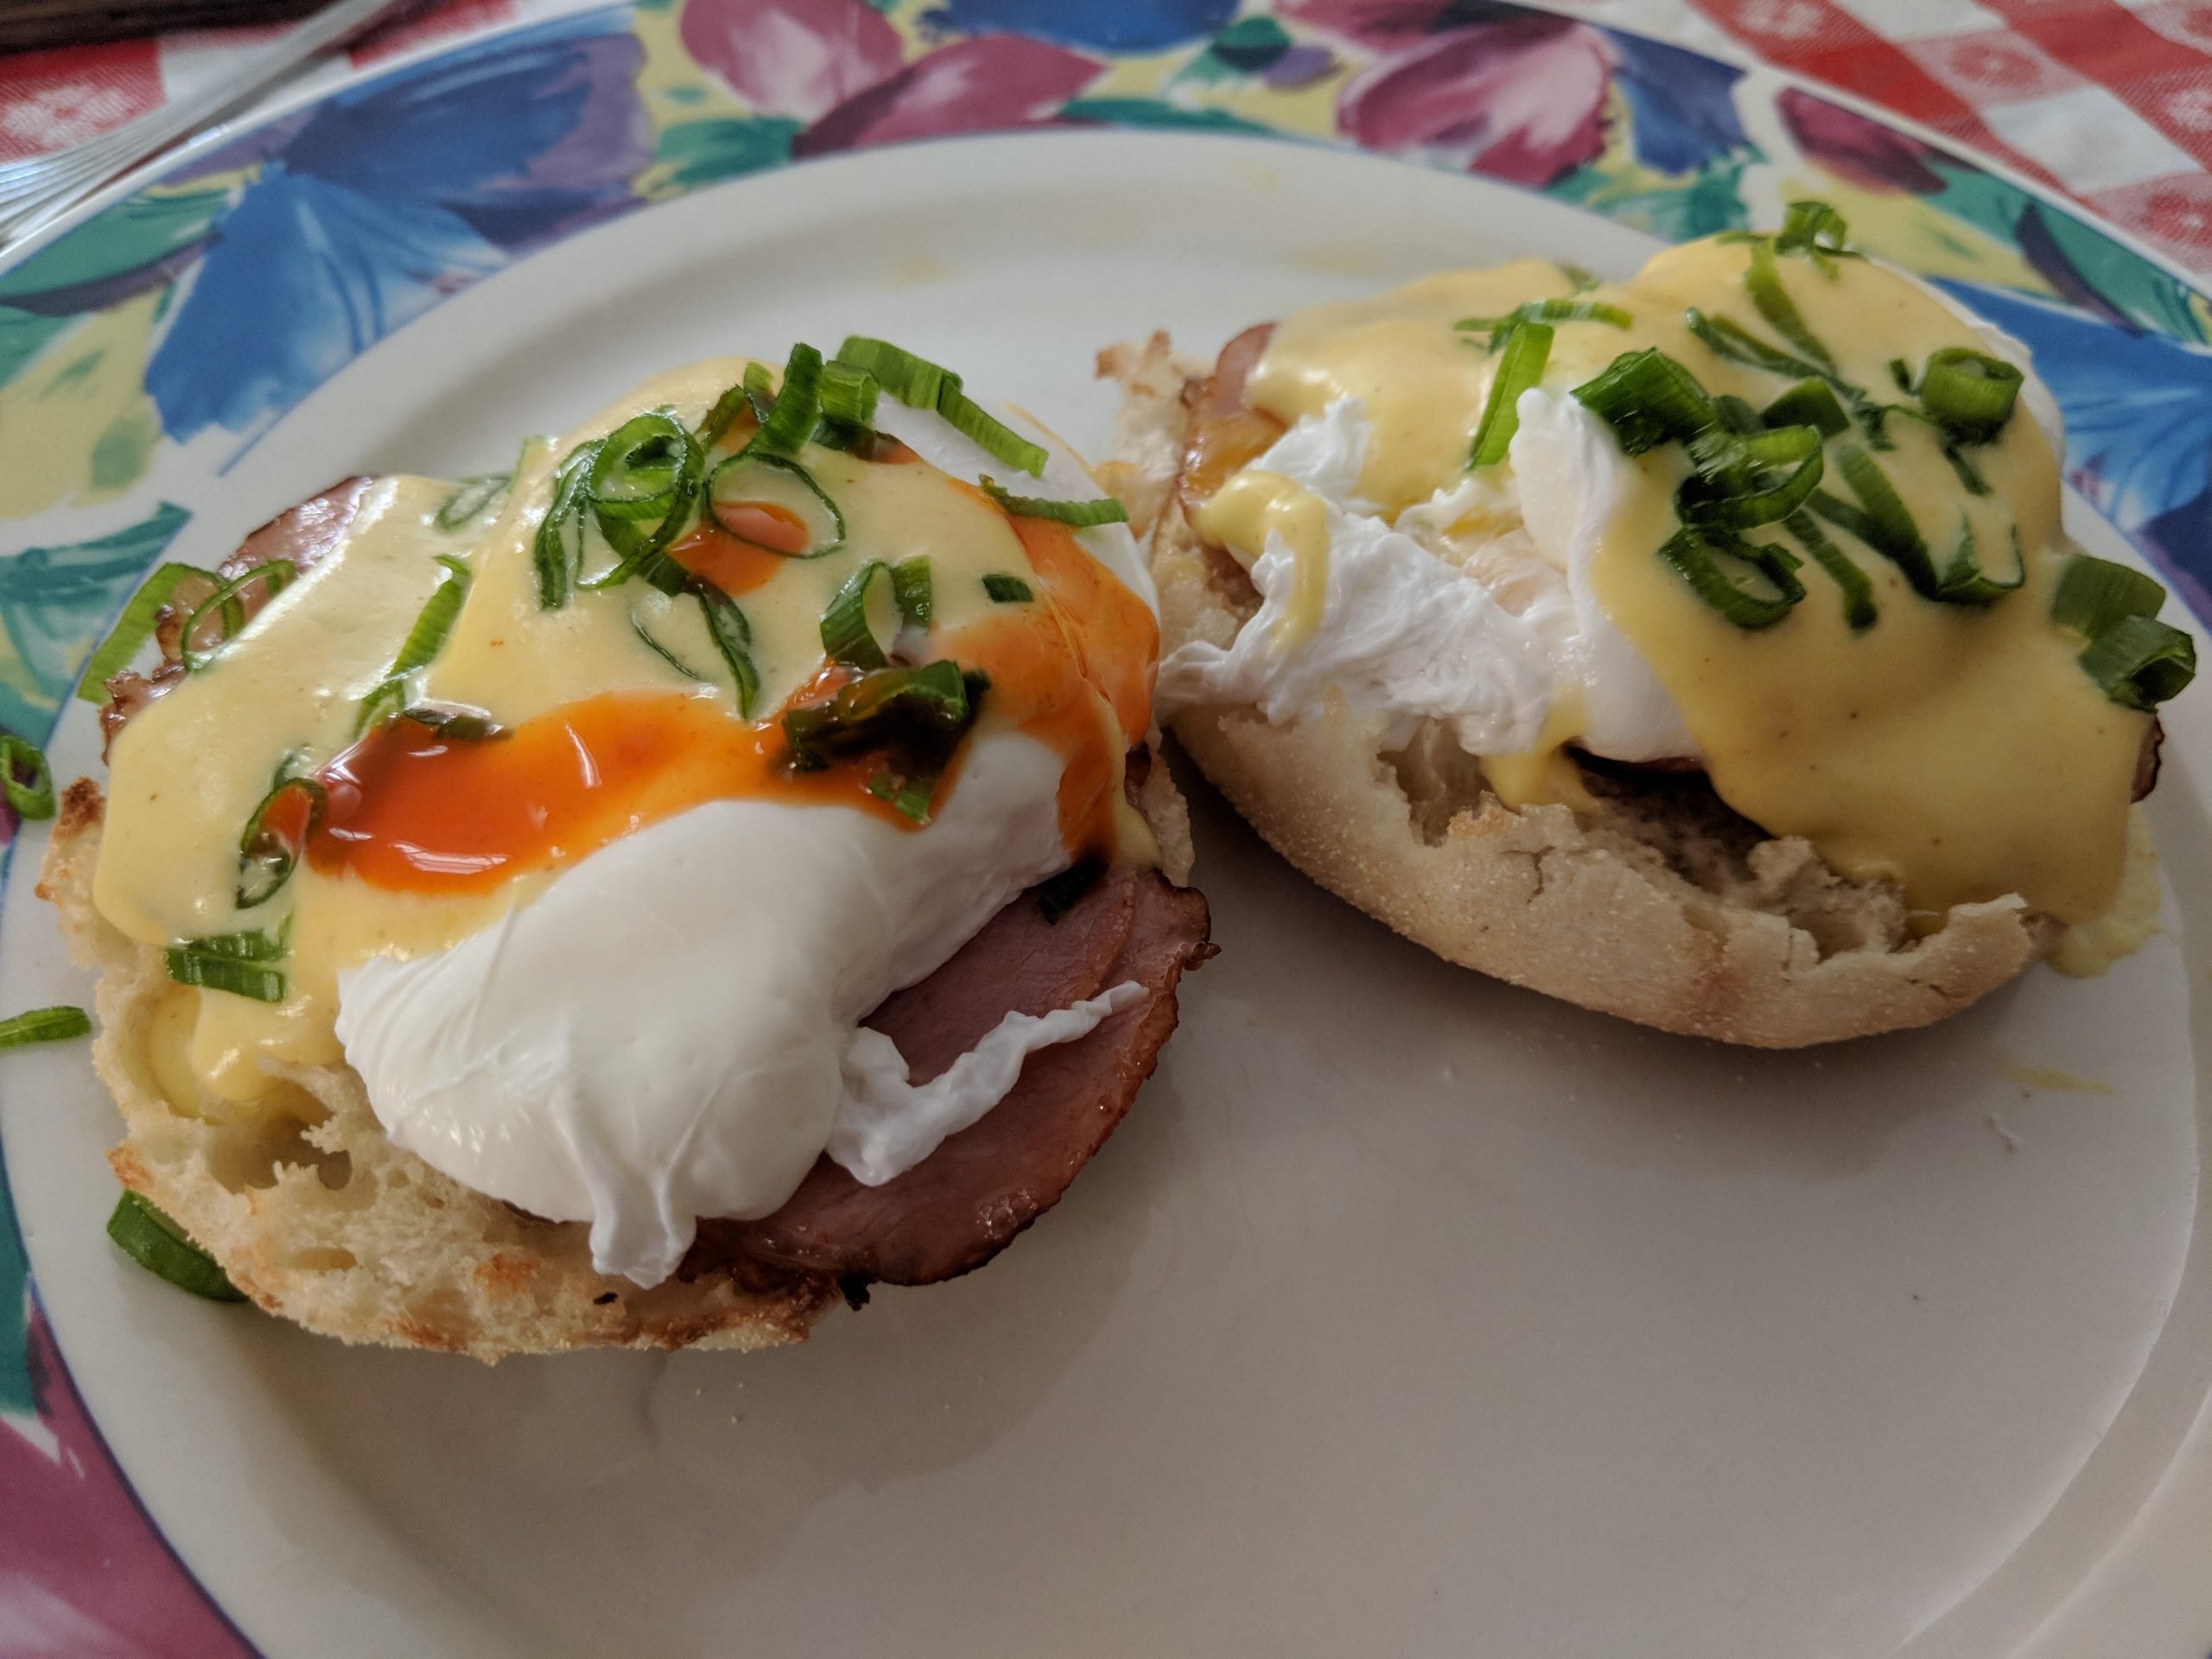 Eggs Benedict with hollandaise sauce made from scratch ...